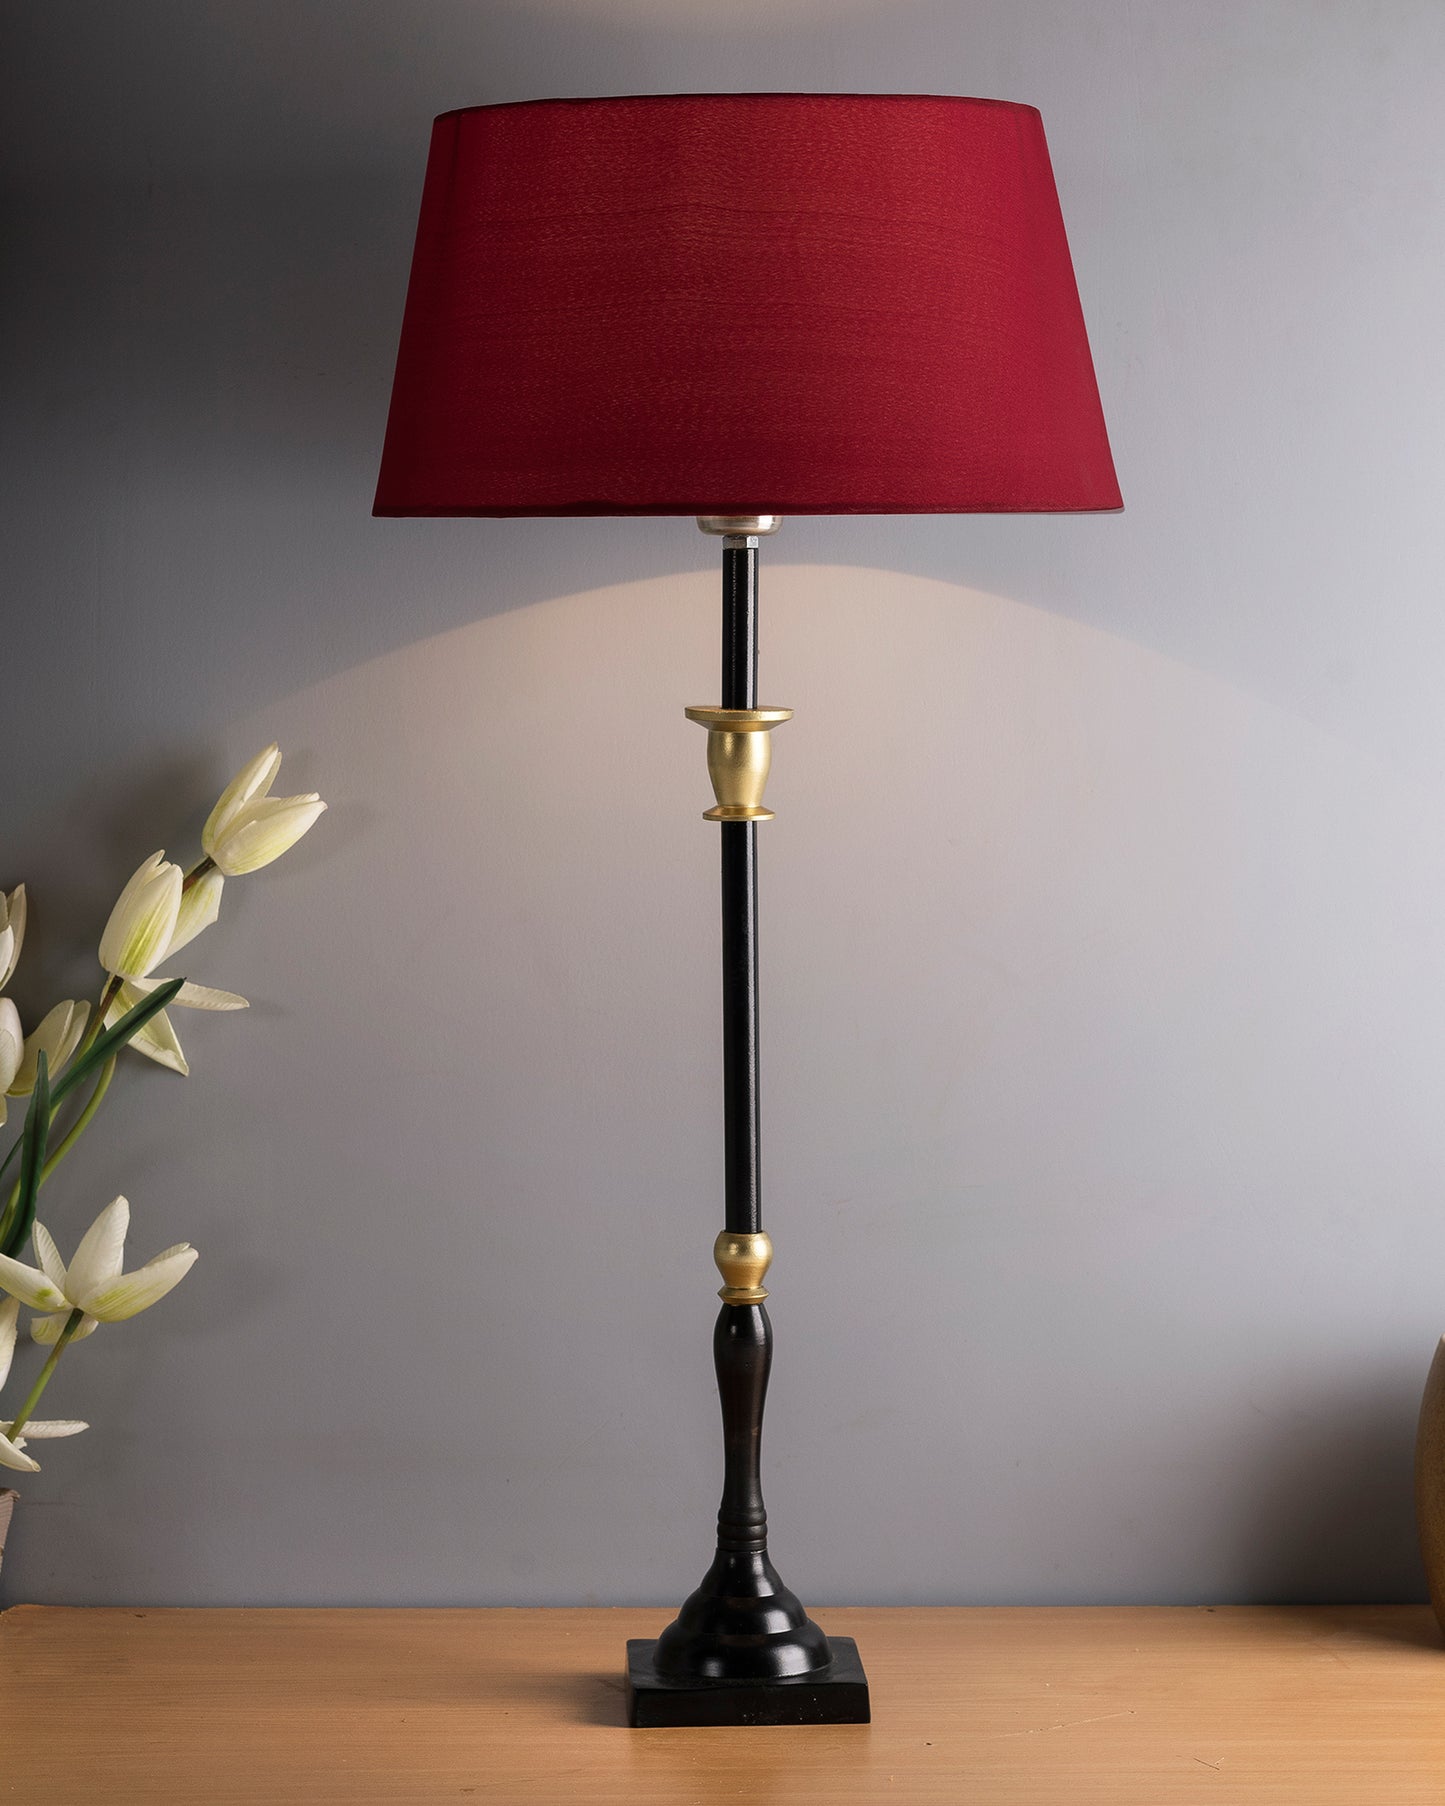 Classic Imperial Black Golden Candlestick Table Lamp, Drum Shade